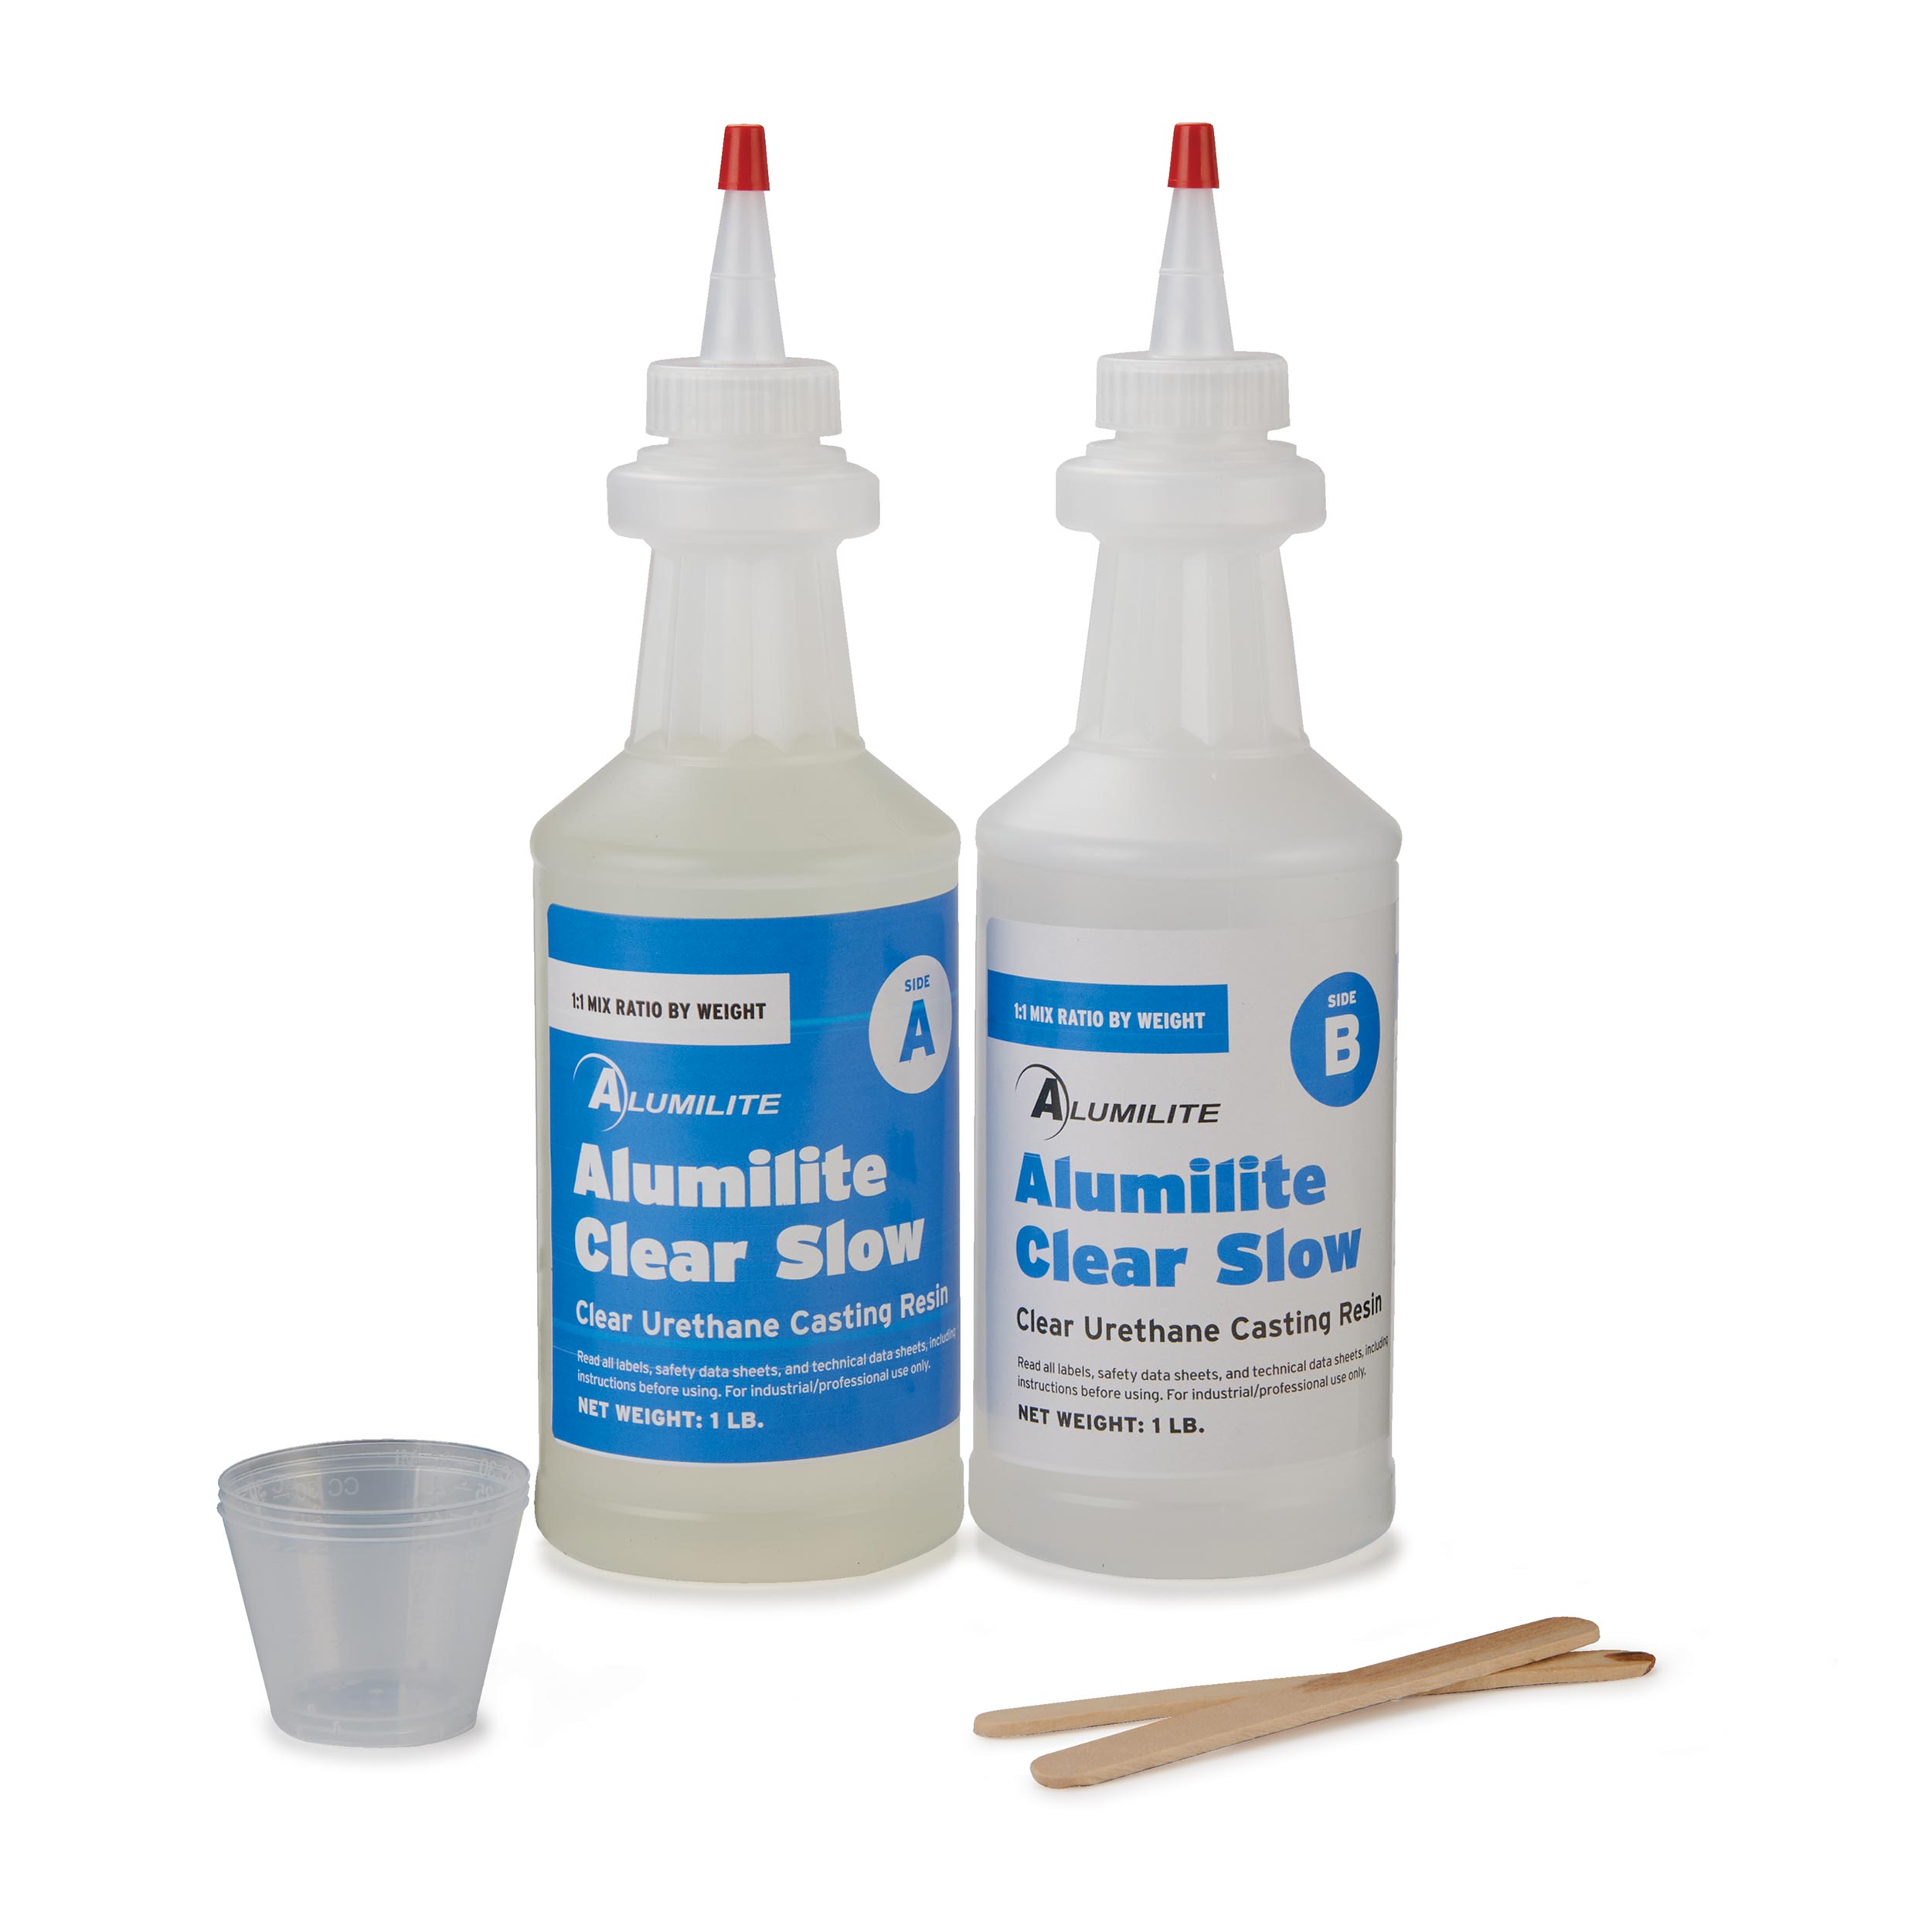 Alumilite Clear (slow) 12 Minute Casting Resin 2 Pound Kit